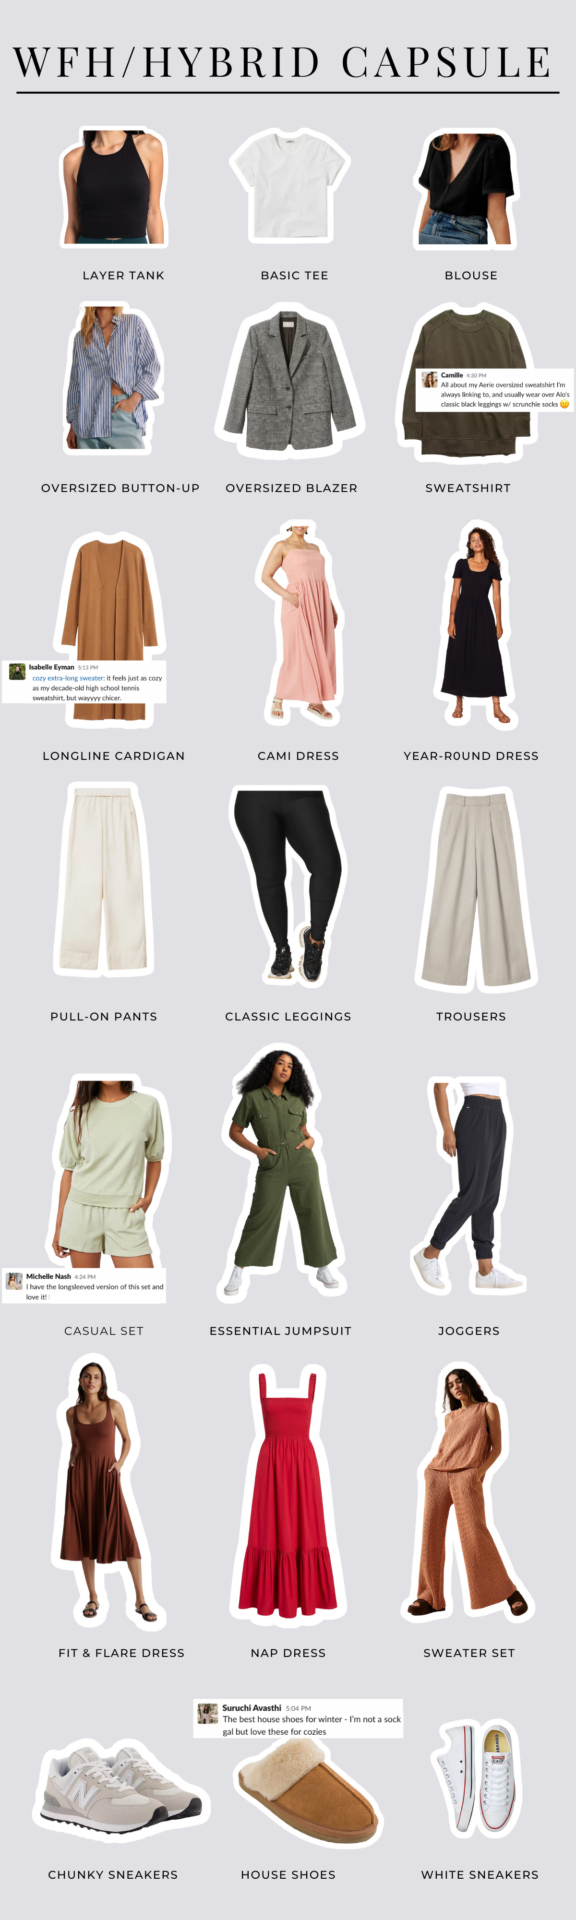 https://camillestyles.com/wp-content/uploads/2023/02/work-from-home-capsule-wardrobe-1-576x1920.png